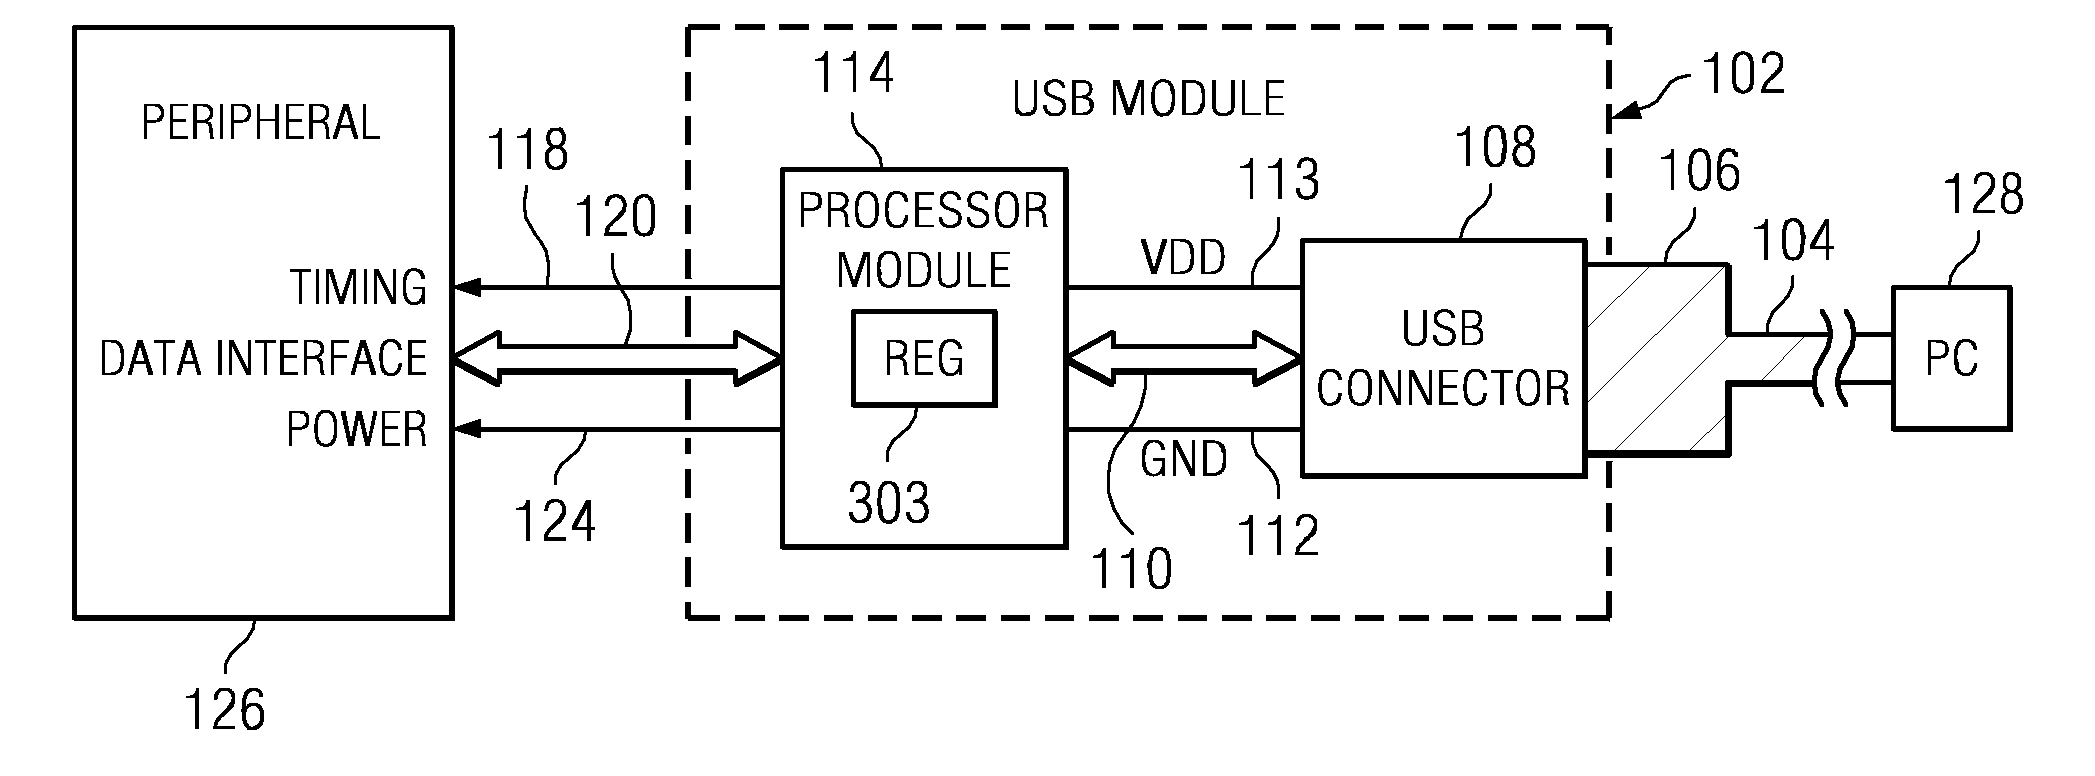 USB tool stick with multiple processors